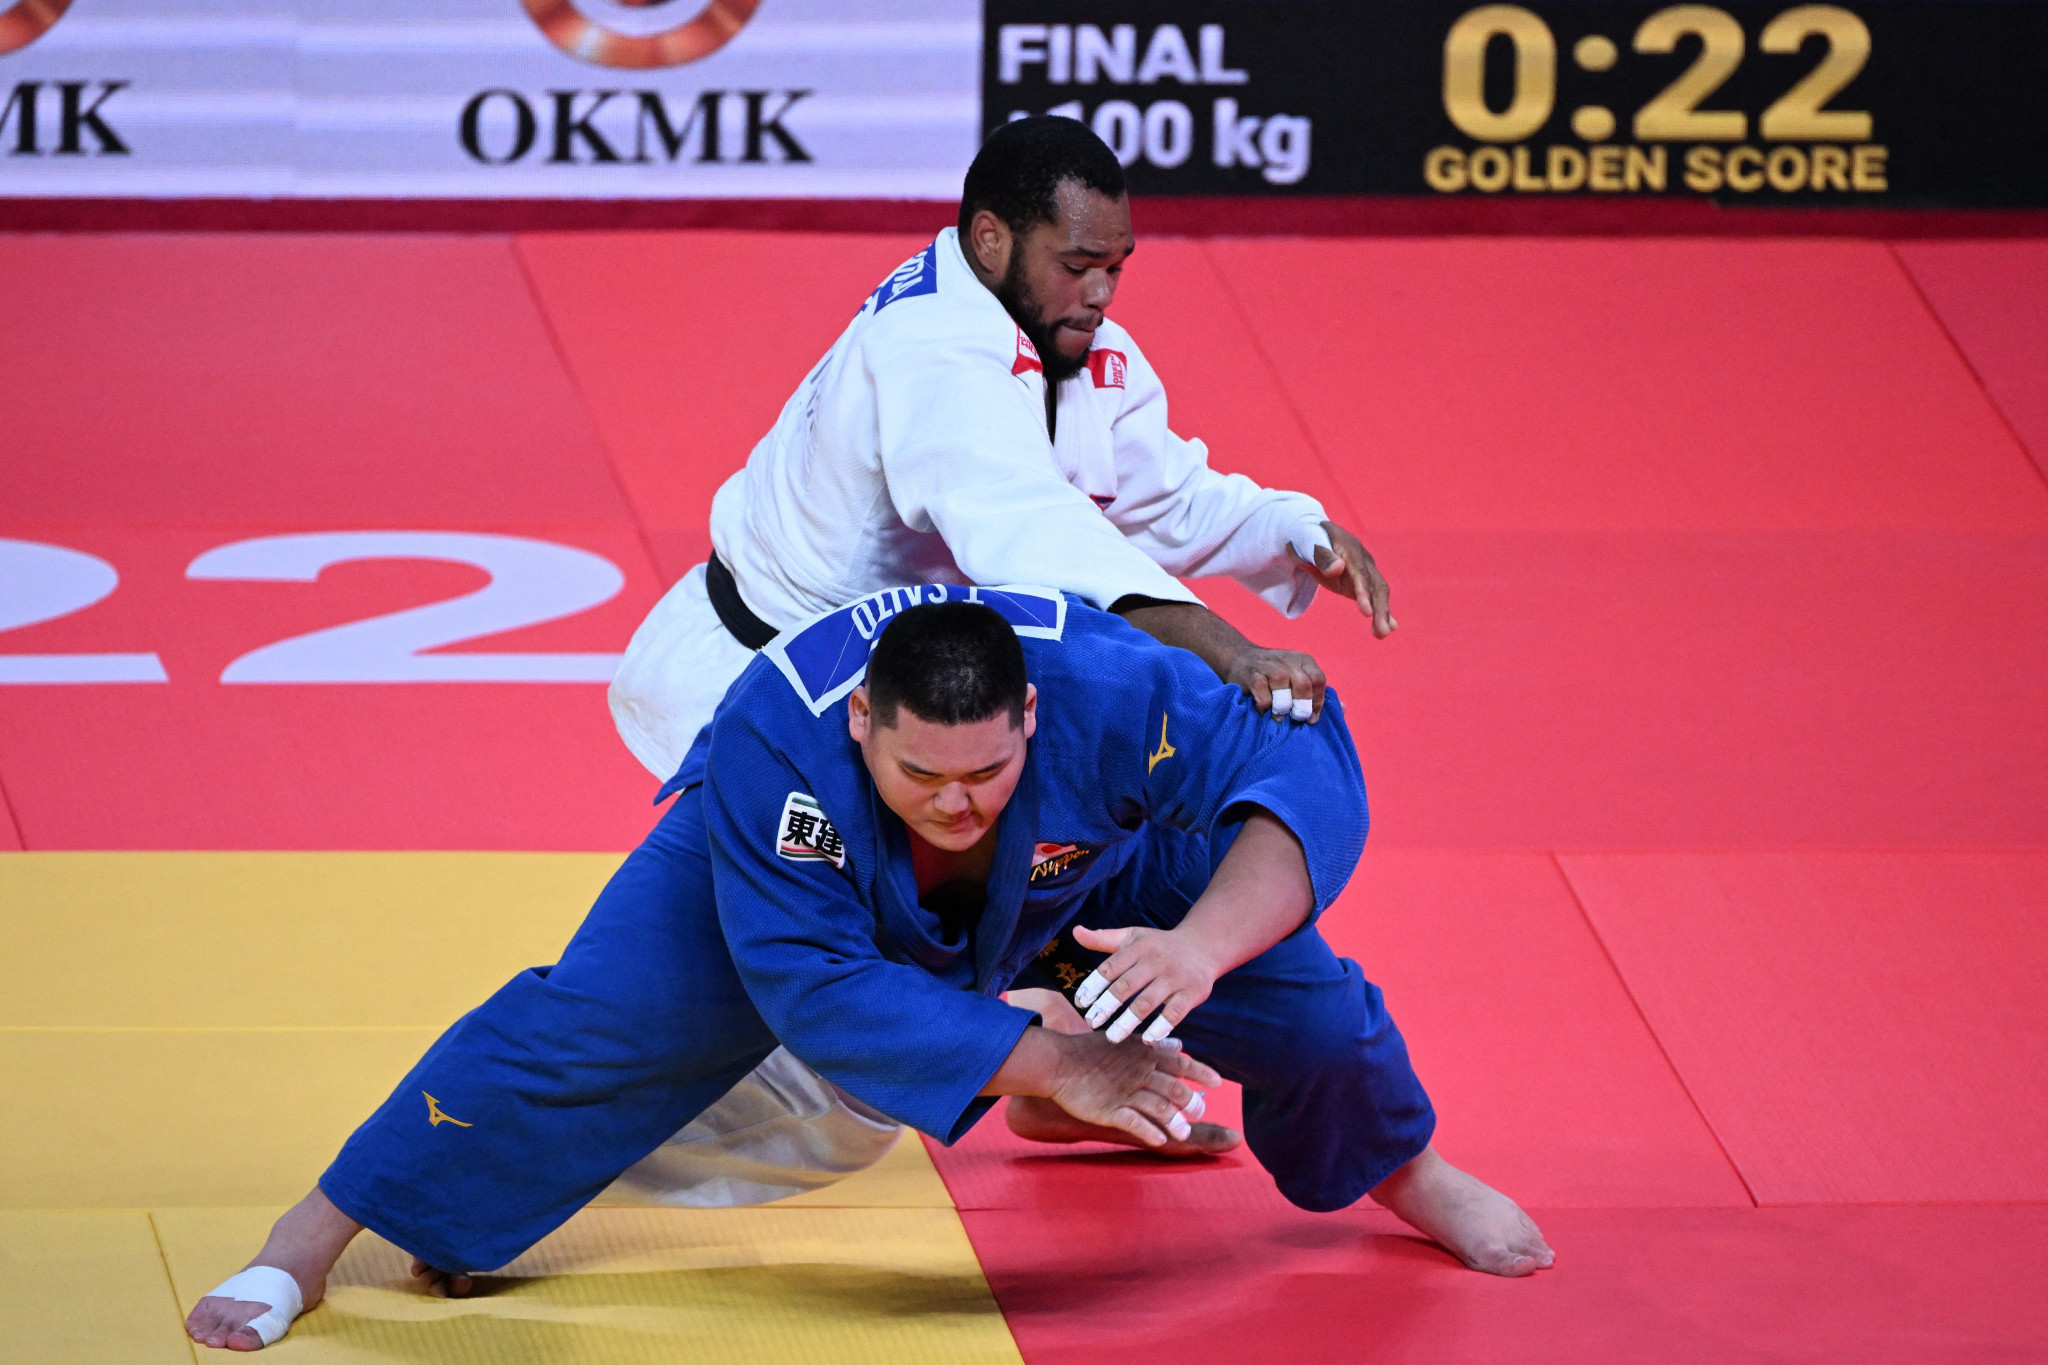 Cuba's Andy Granda, in white, also won his country's first gold of the Championships, this time in the men's over-100kg category ©Getty Images